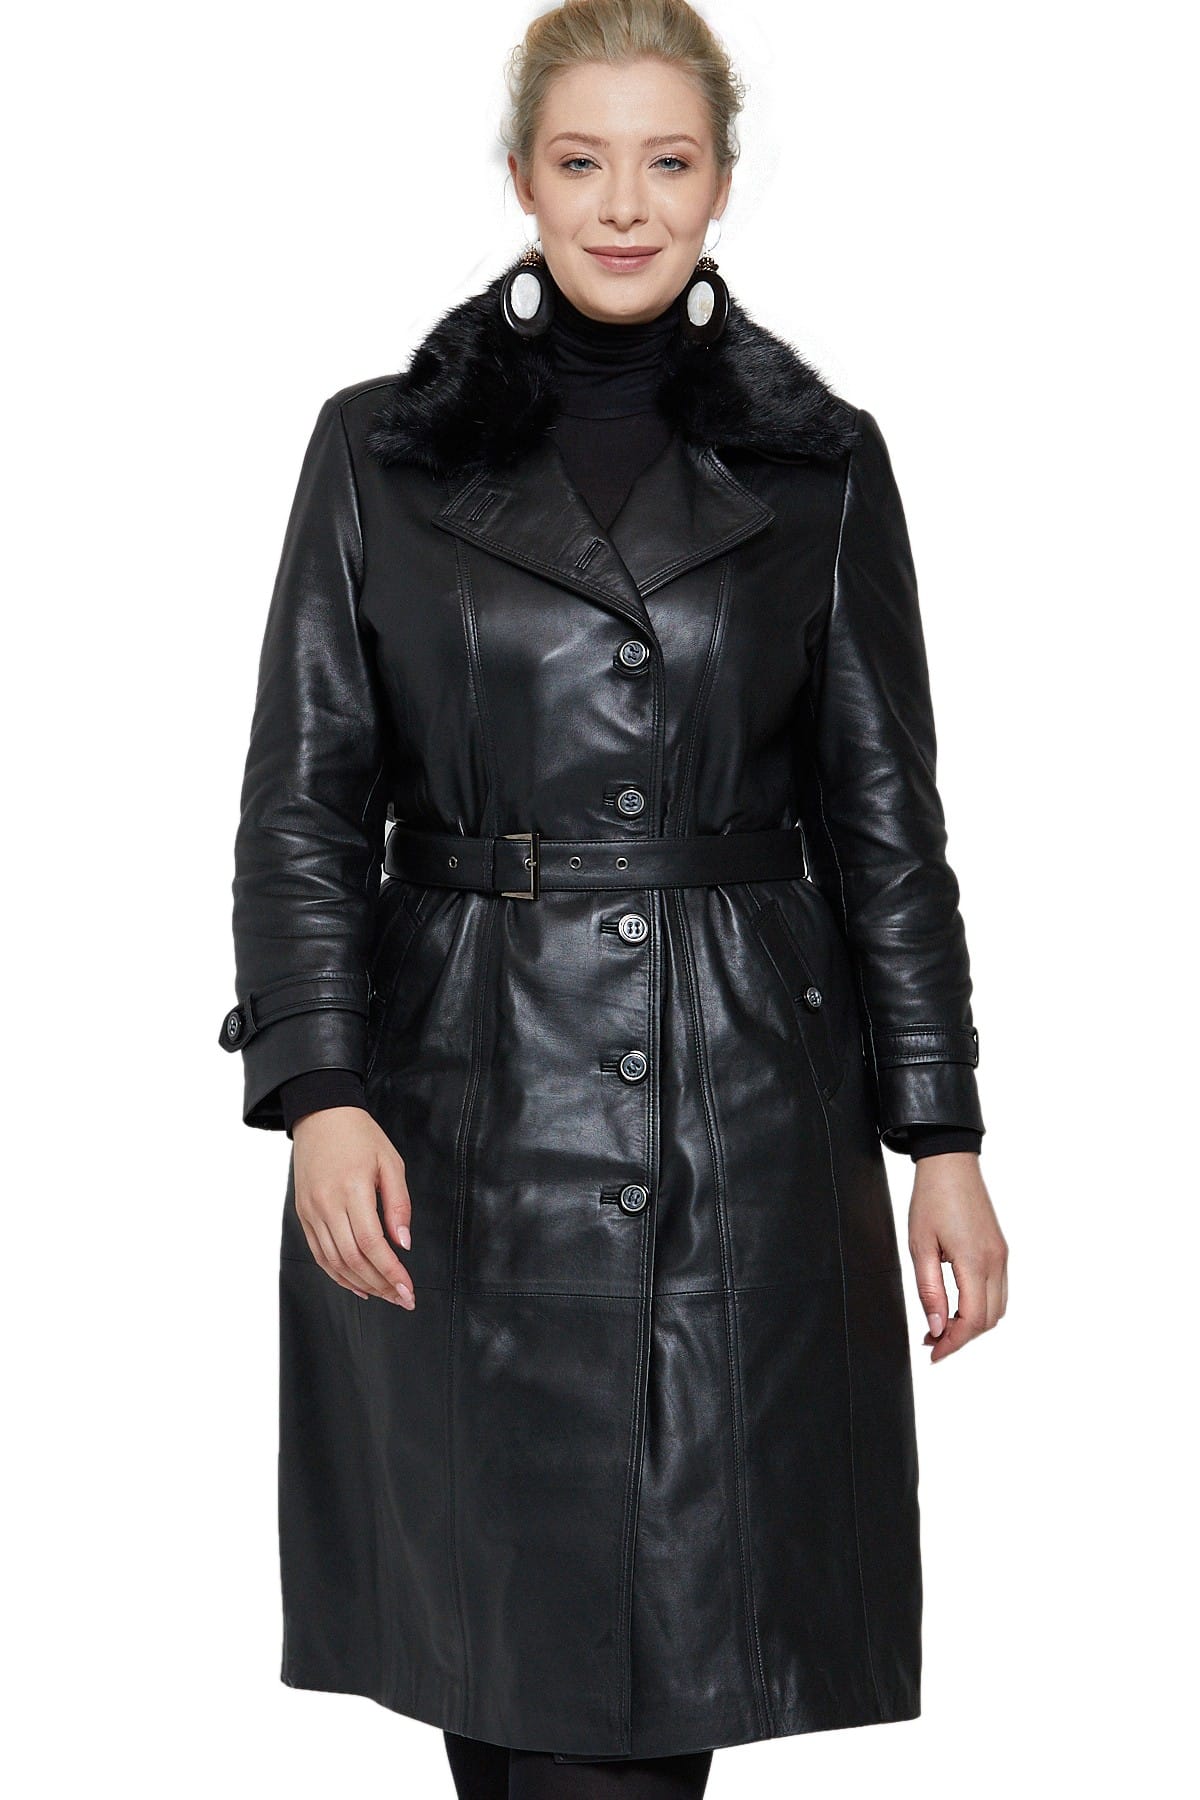 Kendall Jenner Women's 100 % Real Black Leather Trench Fur Collar Coat